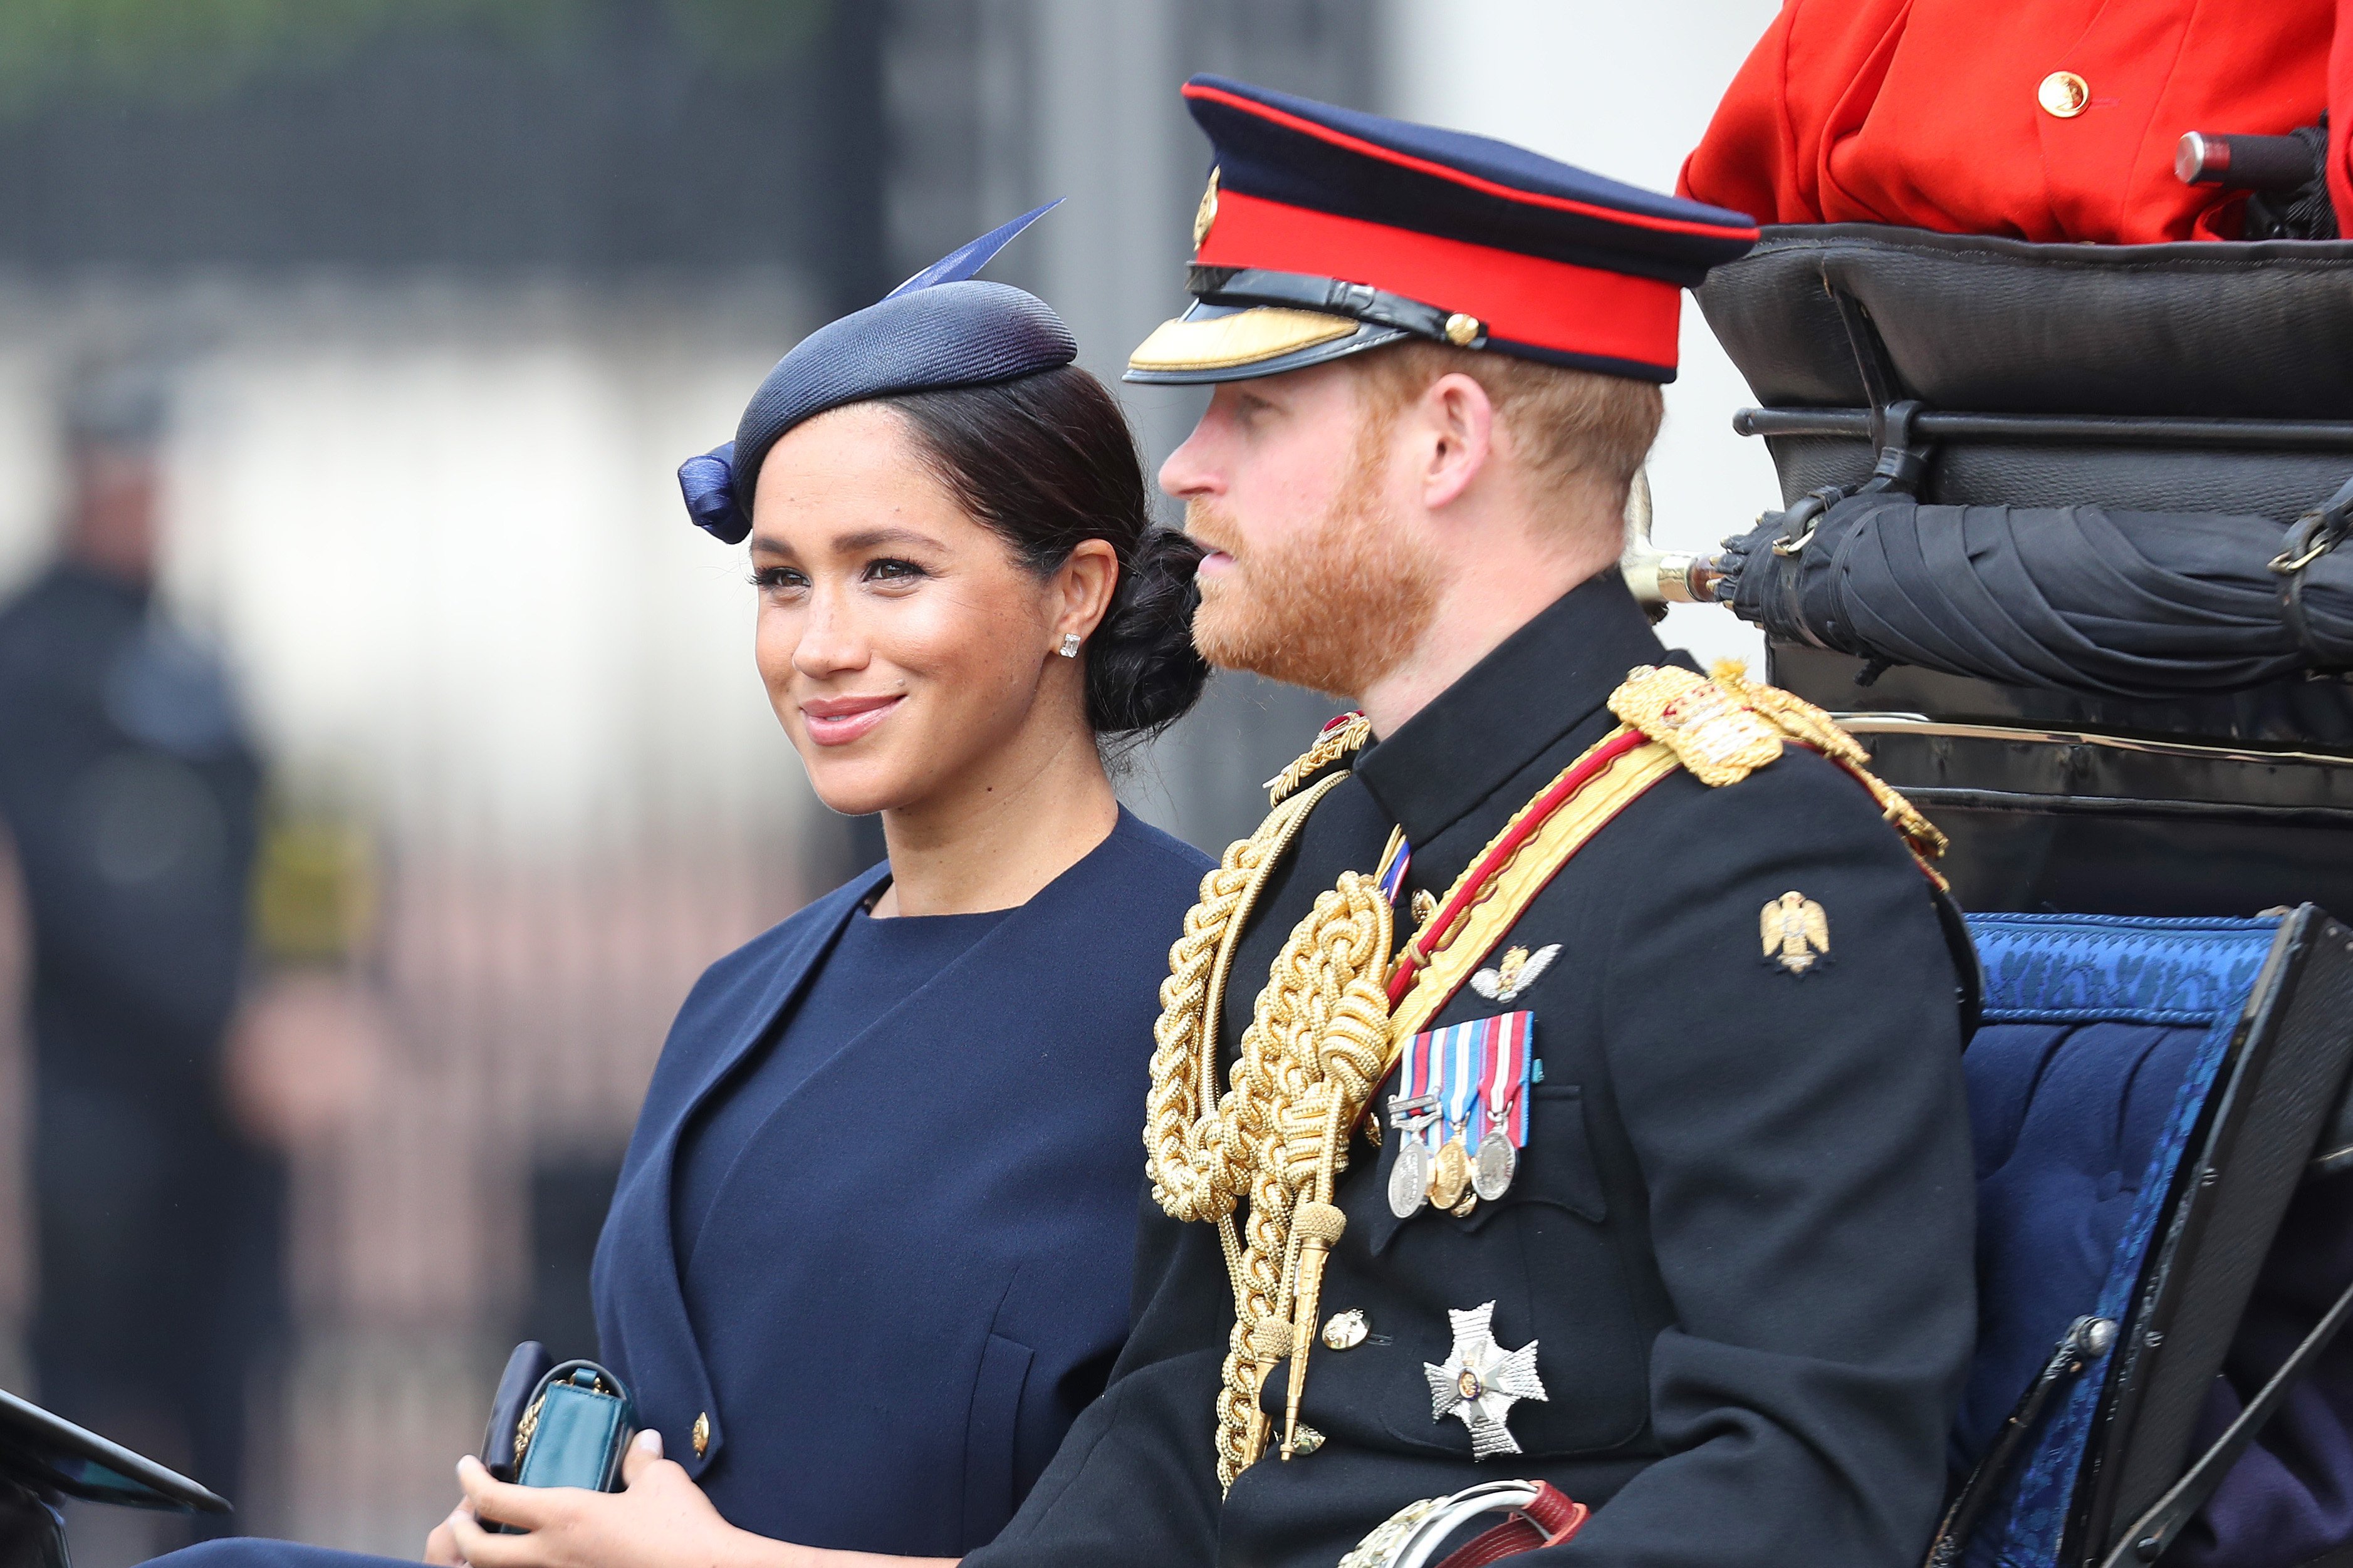 Meghan Markle and Prince Harry arriving at the Buckingham Palace for Trooping the Colour | Photo: Getty Images